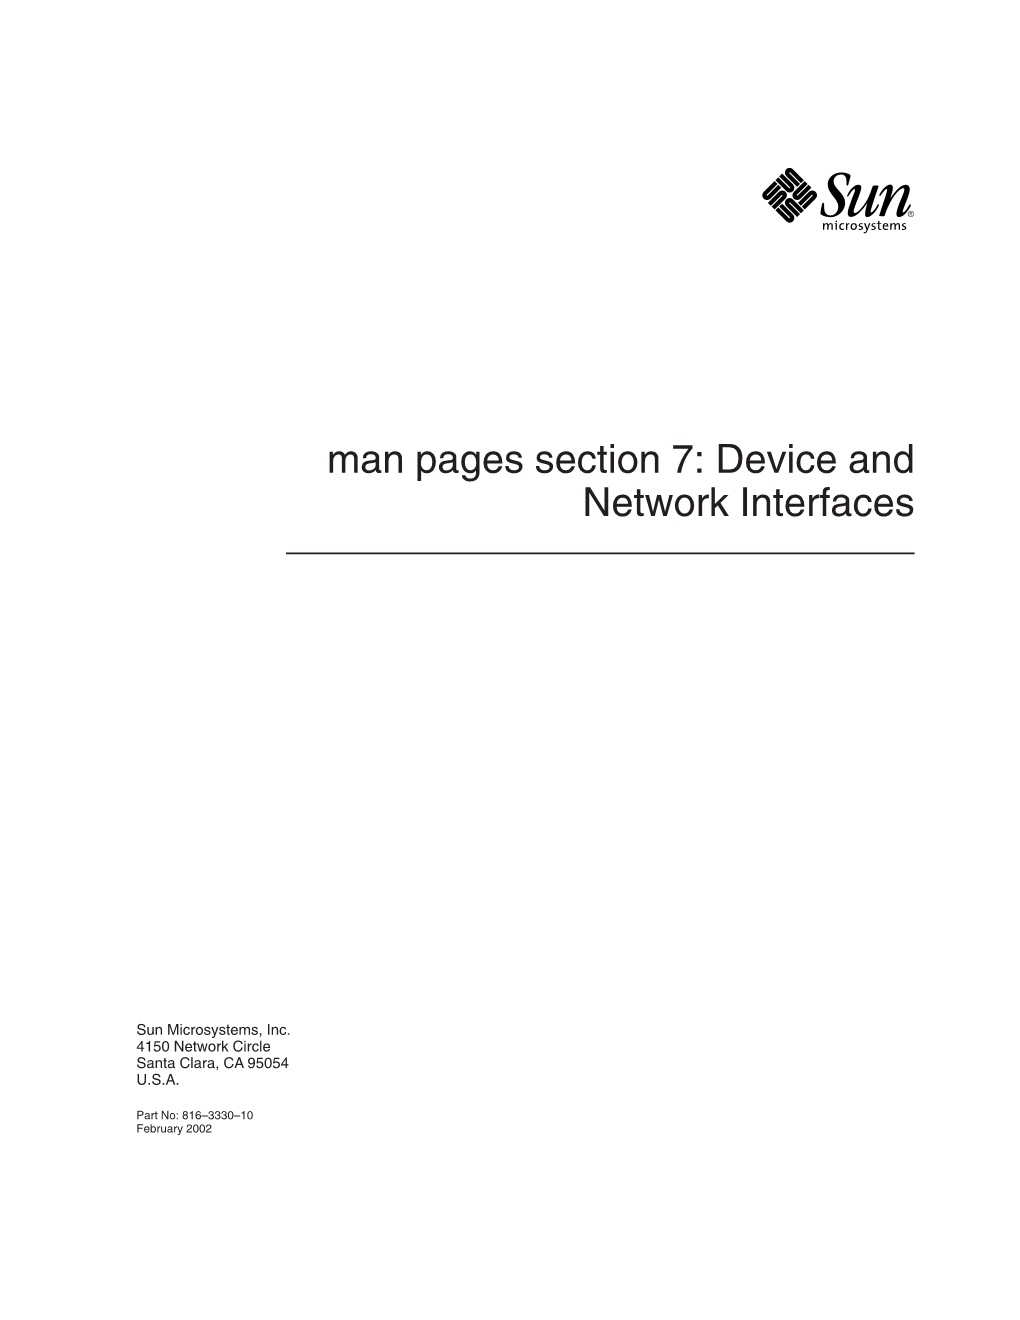 Man Pages Section 7: Device and Network Interfaces